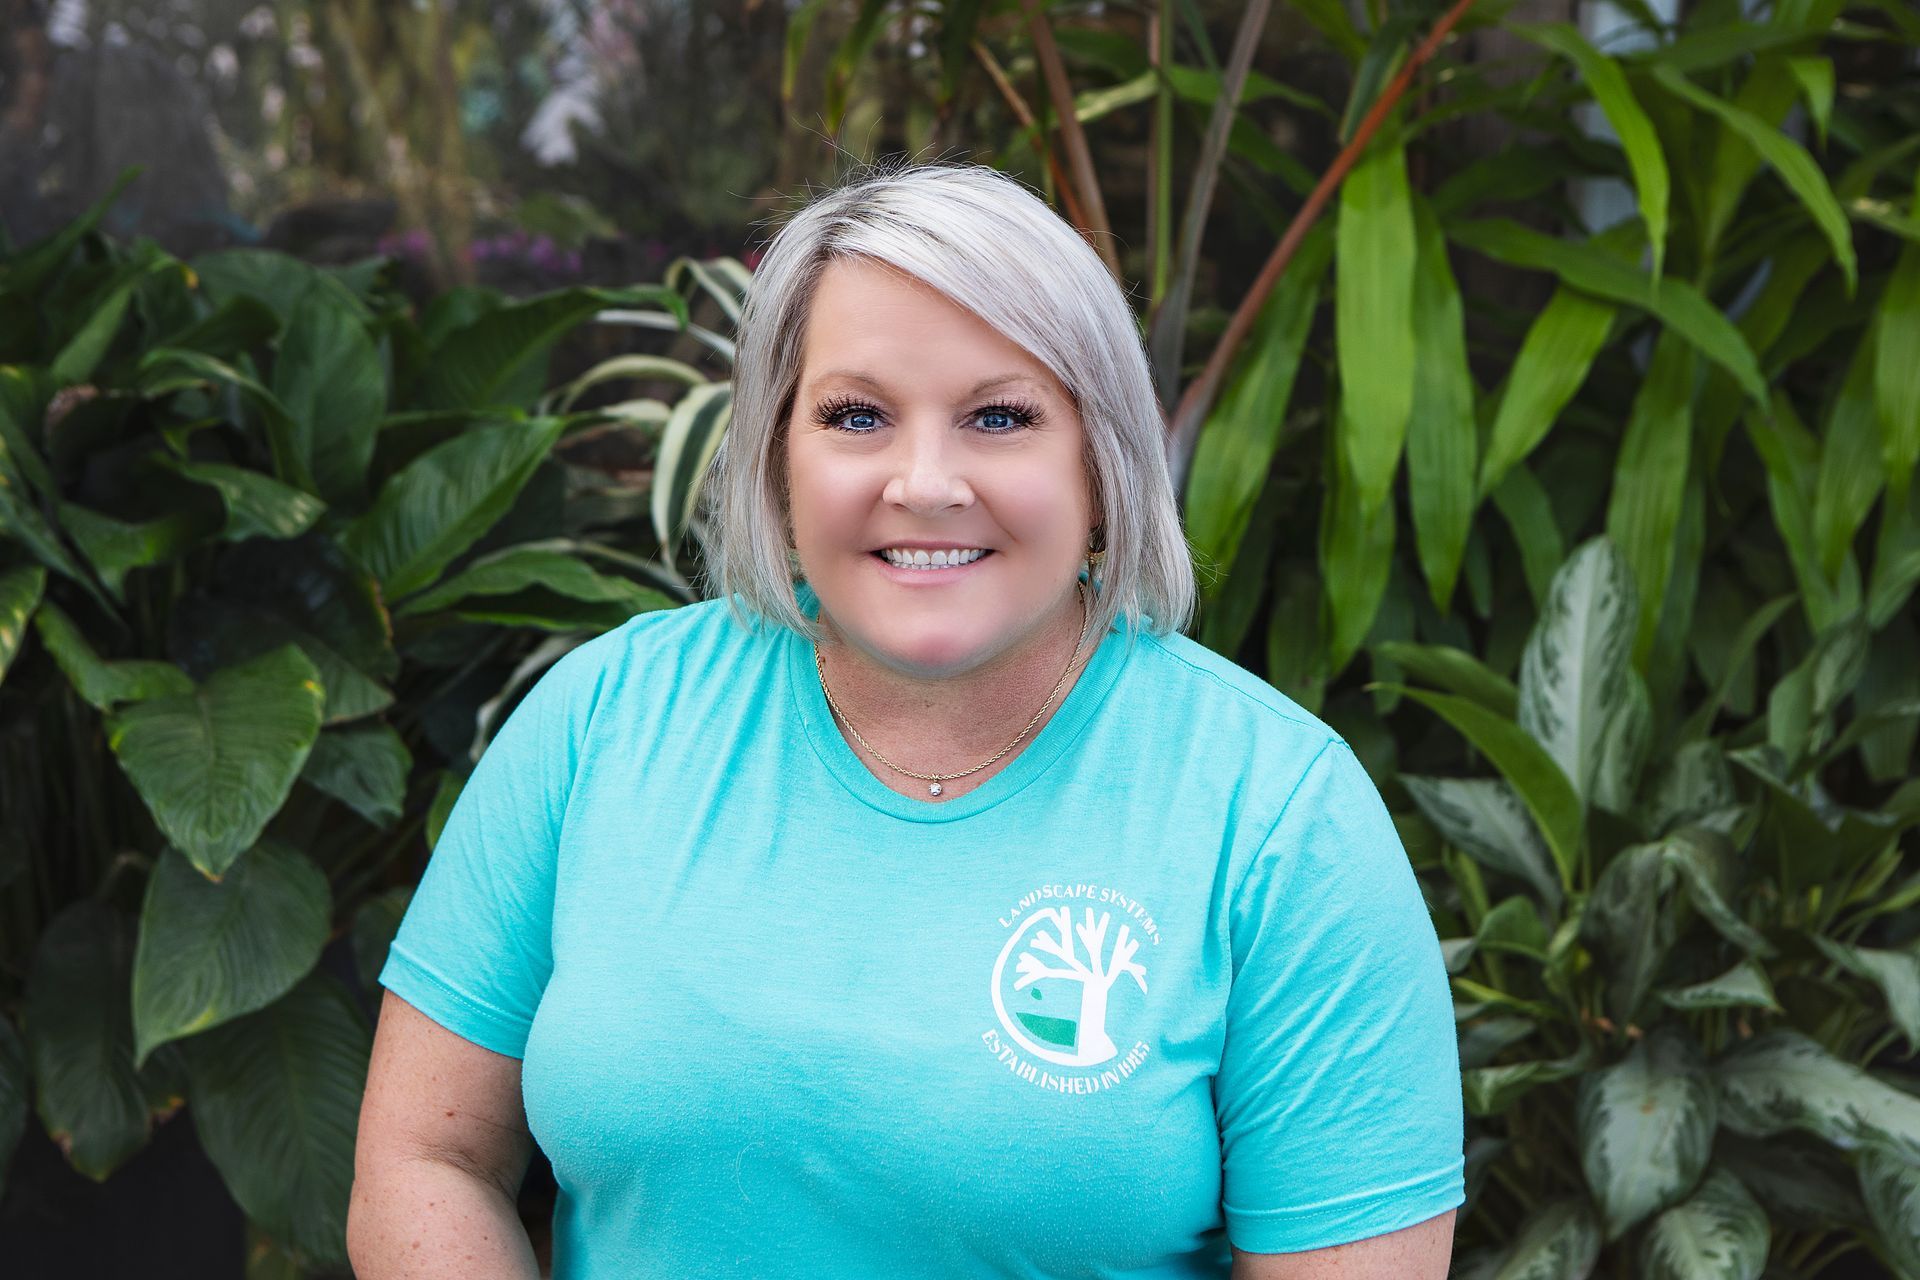 A woman in a blue shirt is standing in front of a bush.